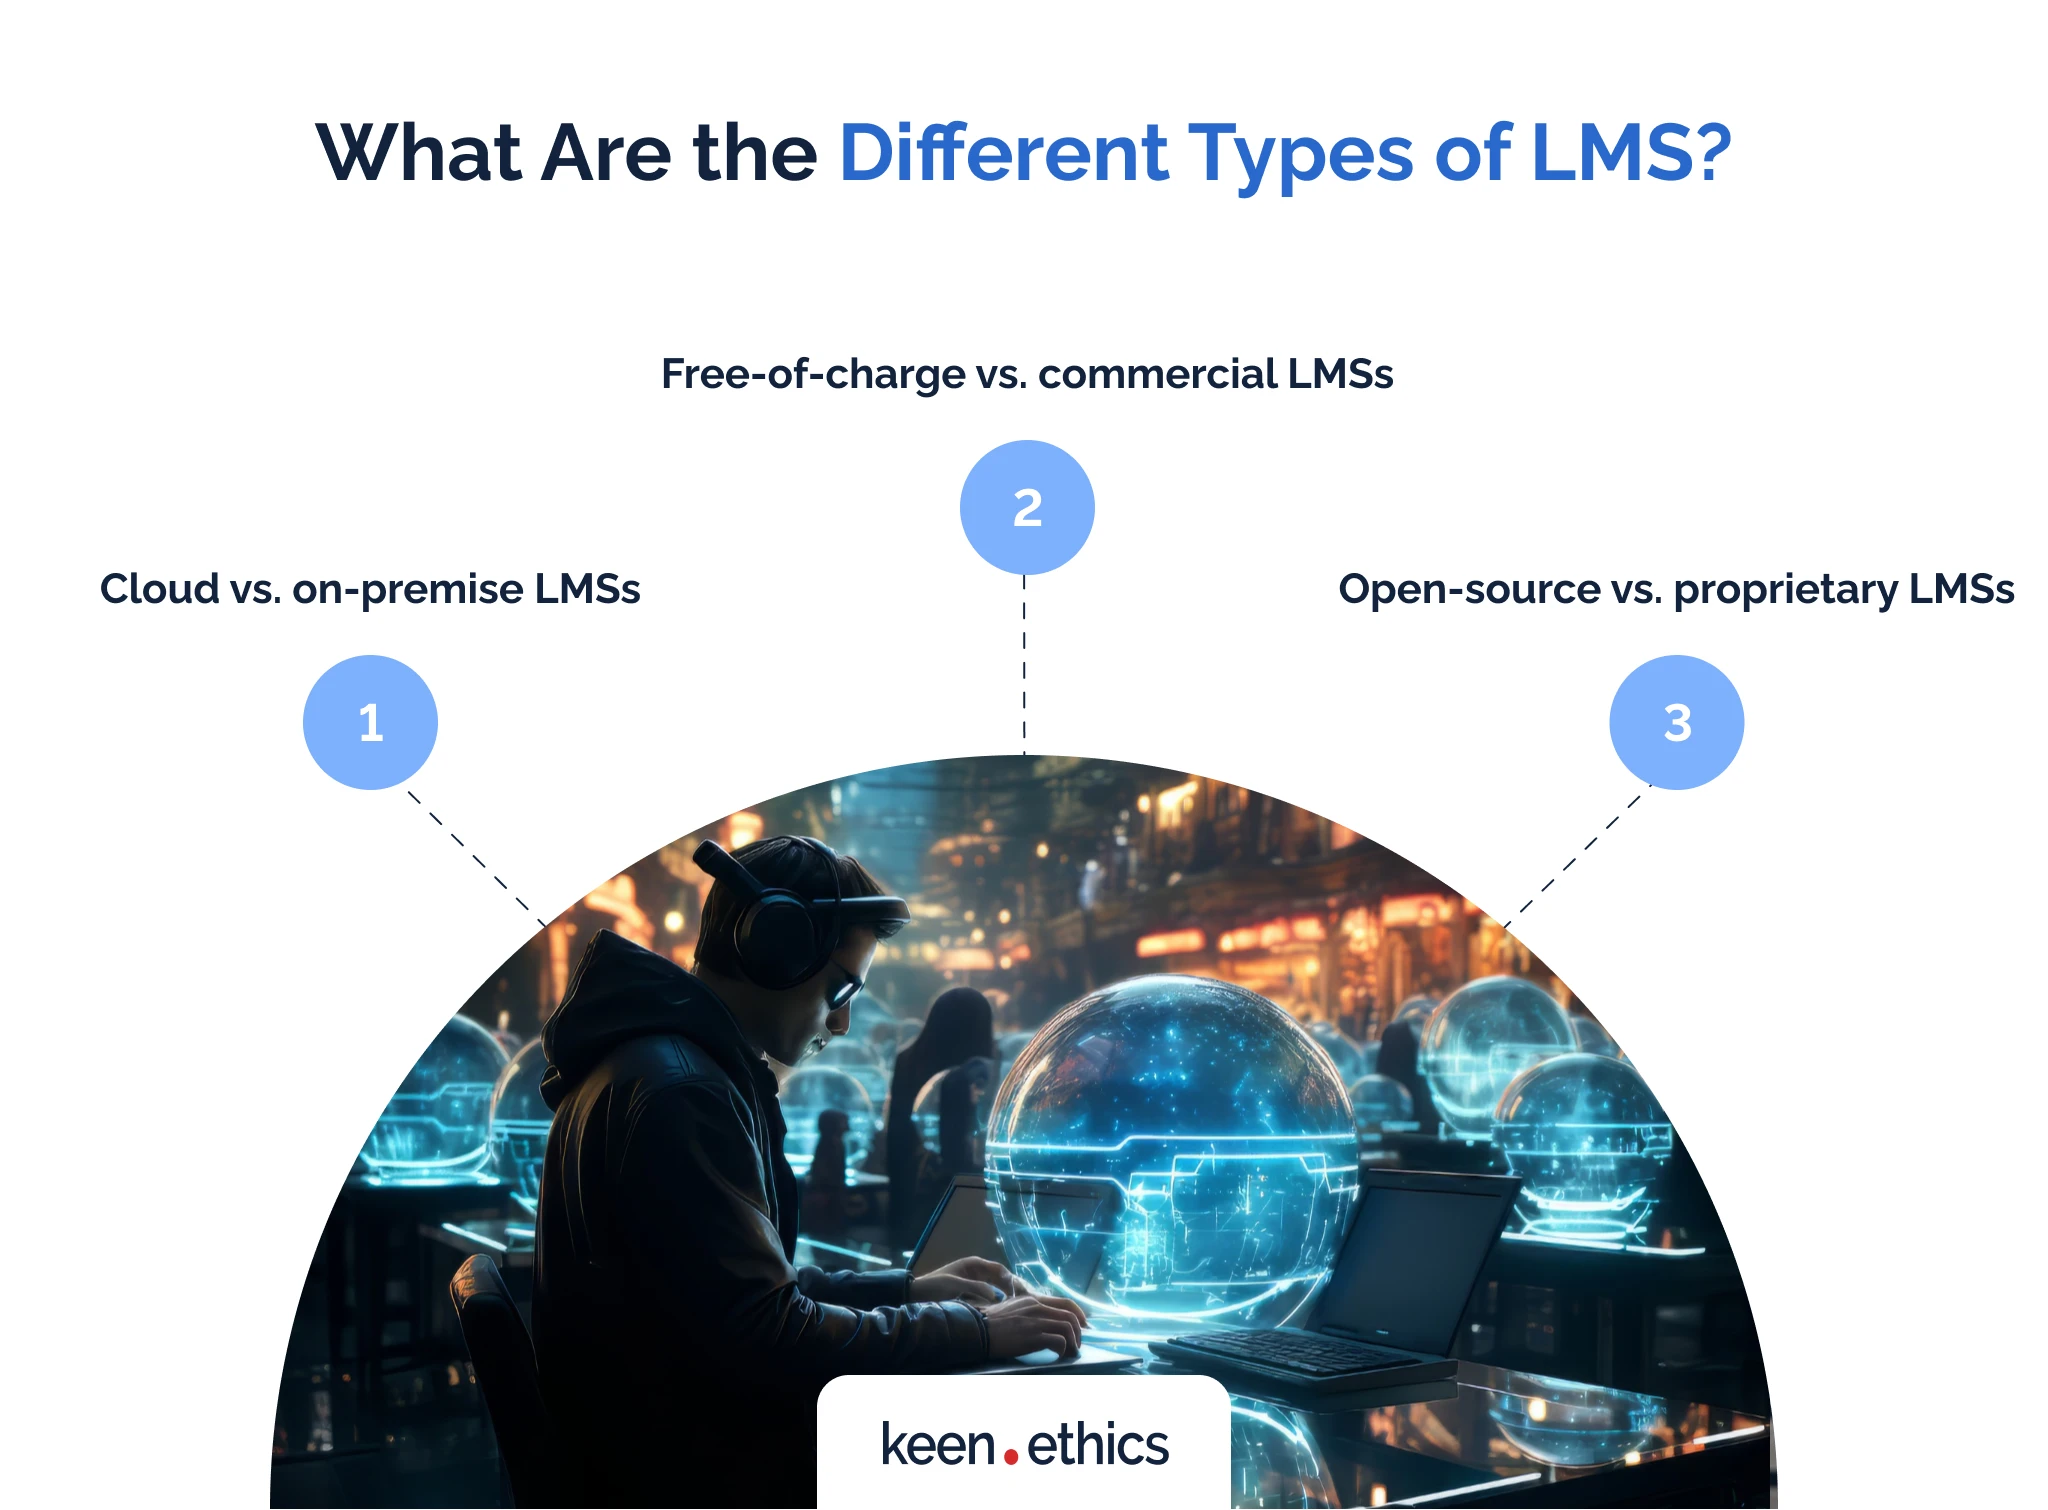 What are the different types of LMS?